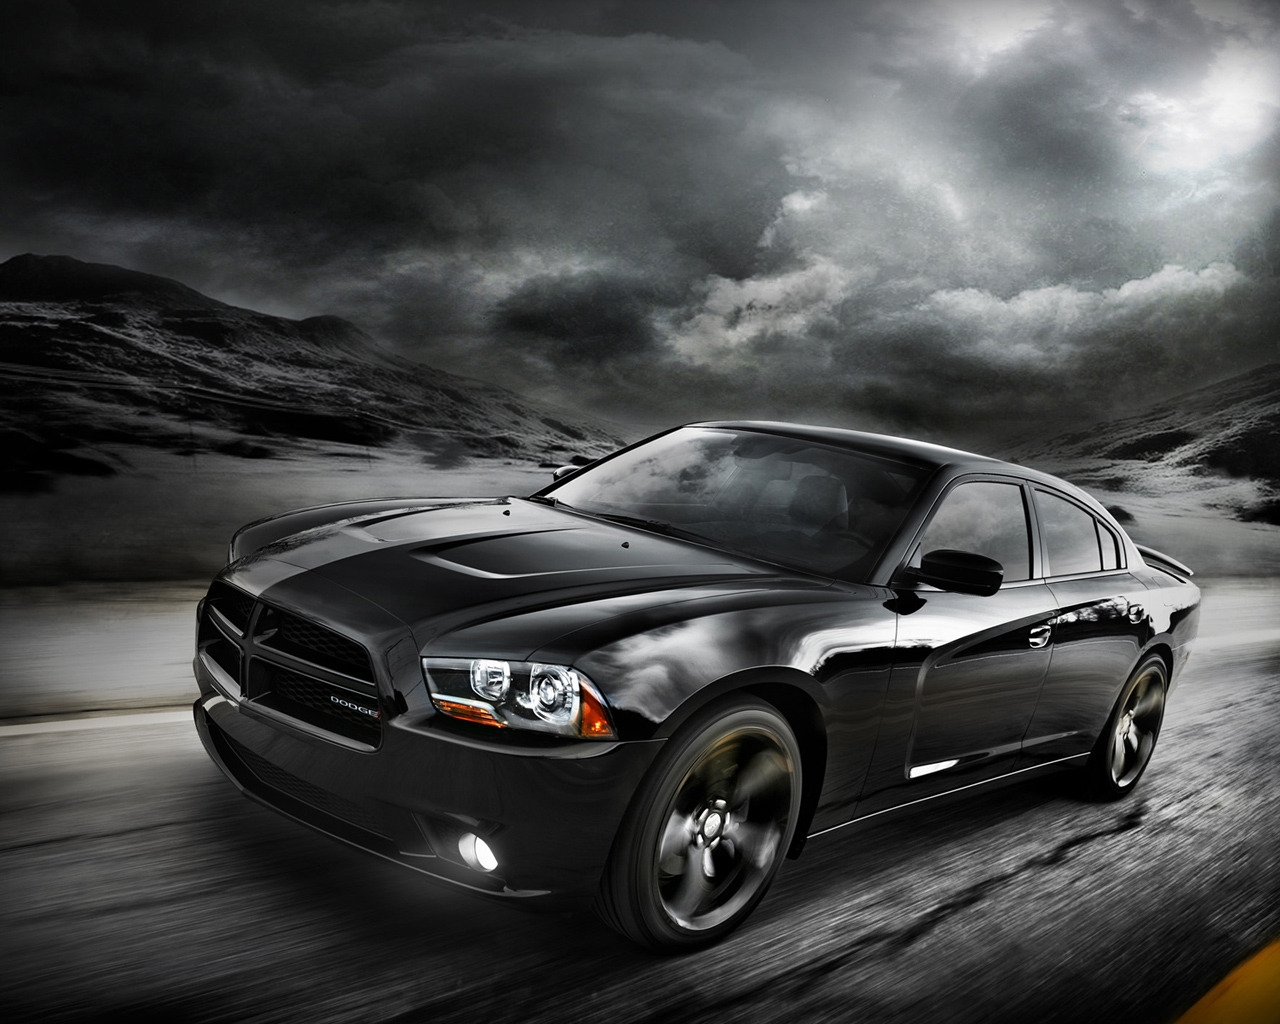 Dodge Charger Blacktop 2012 for 1280 x 1024 resolution